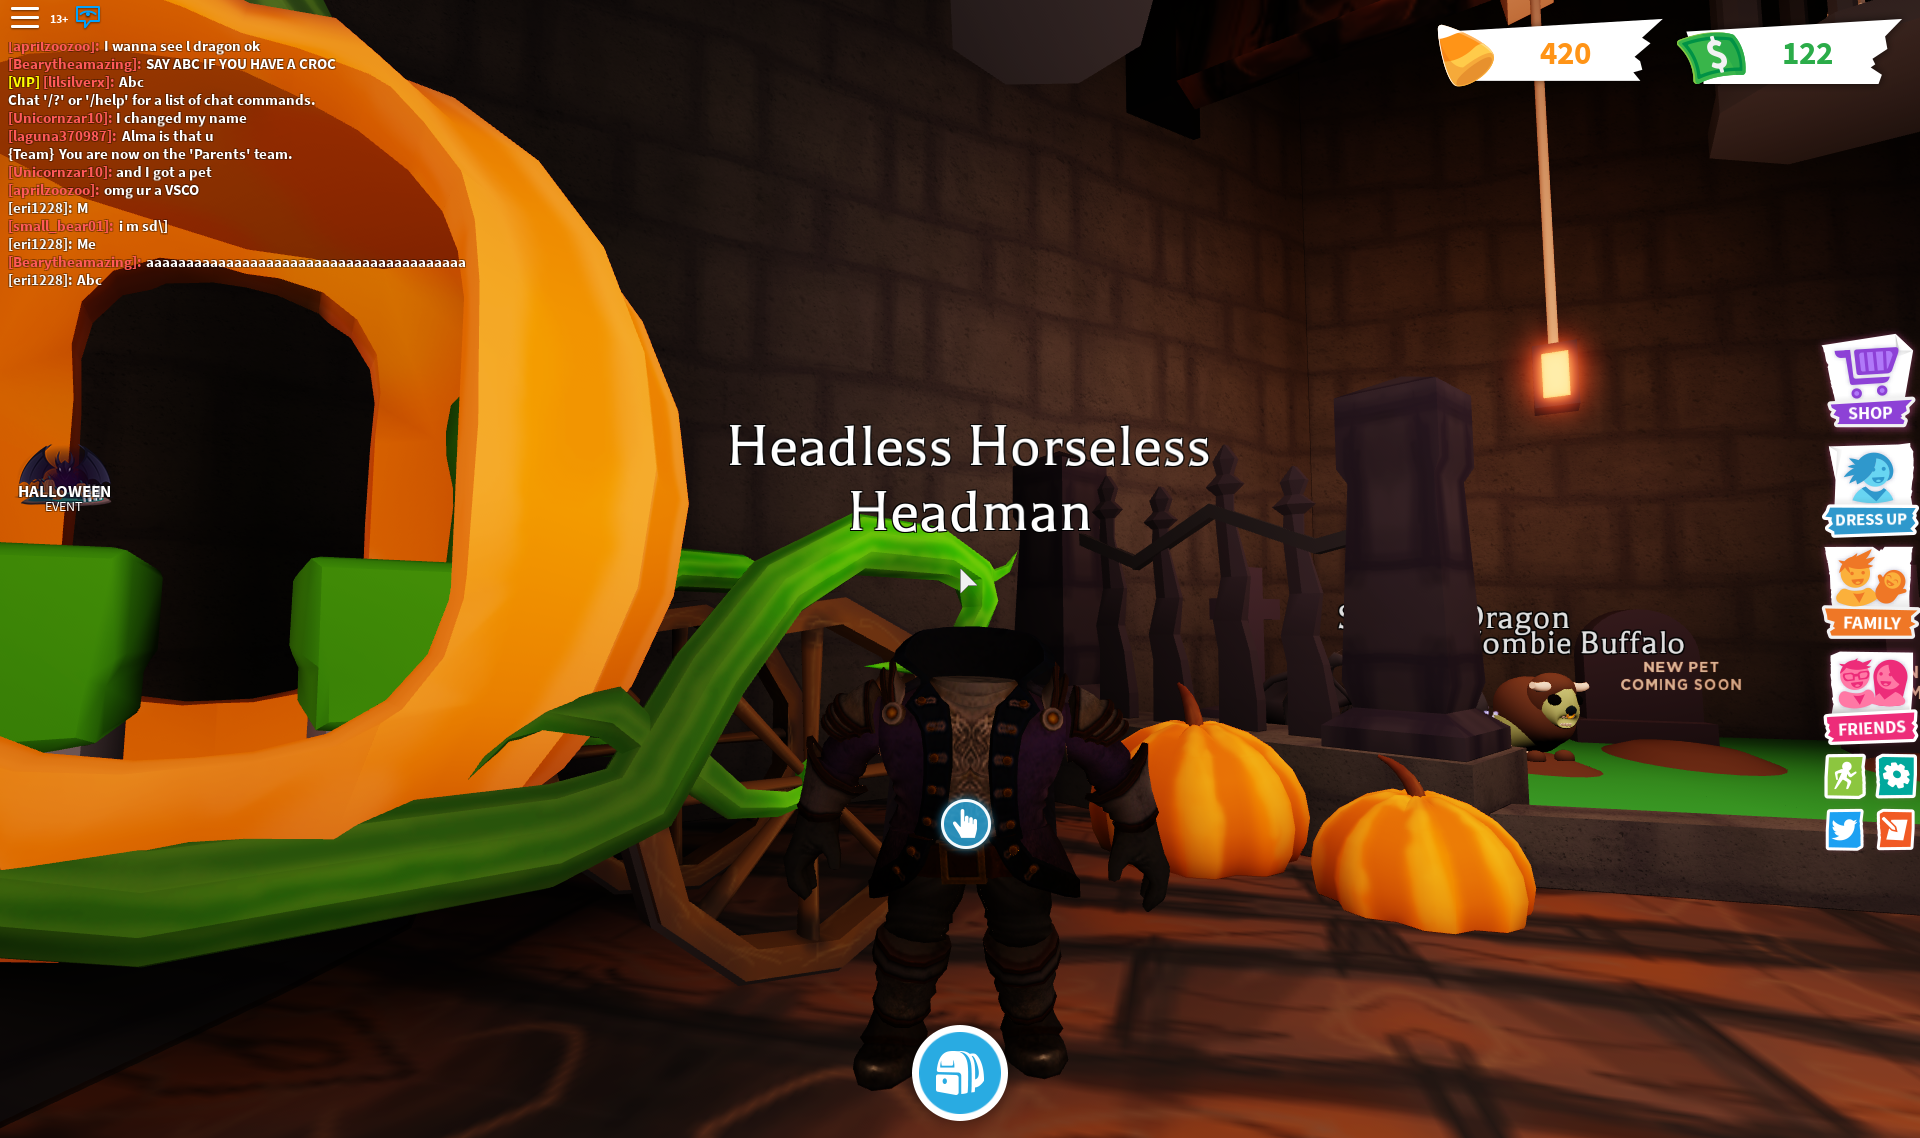 How Do You Get The Headless Horseman In Roblox 2020 - headless horseman roblox id code